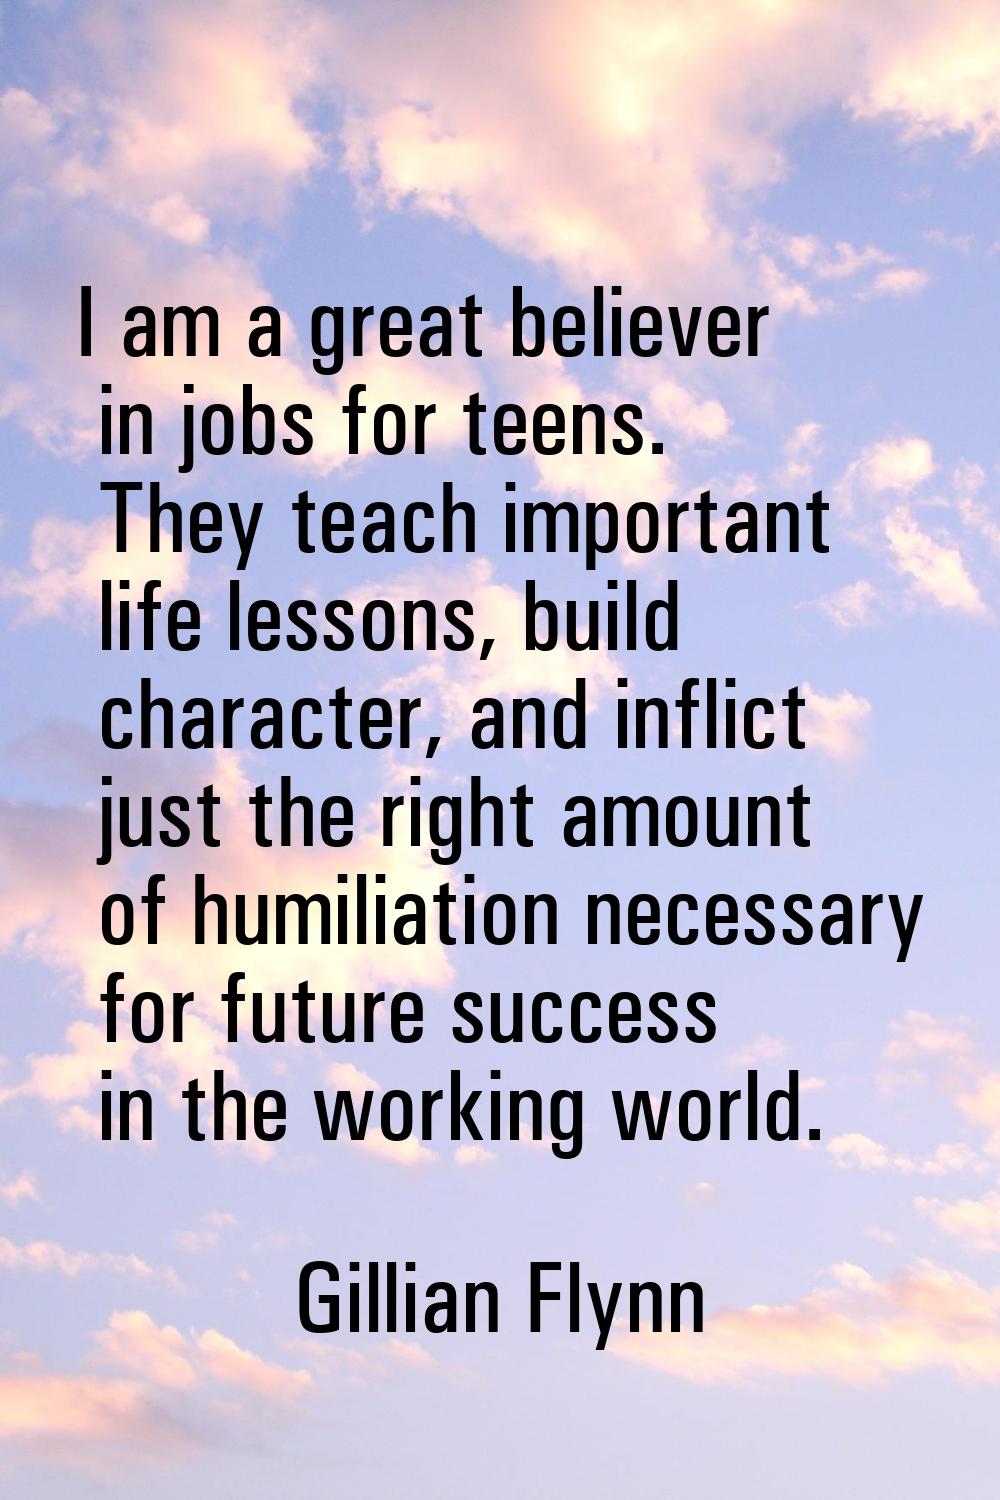 I am a great believer in jobs for teens. They teach important life lessons, build character, and in